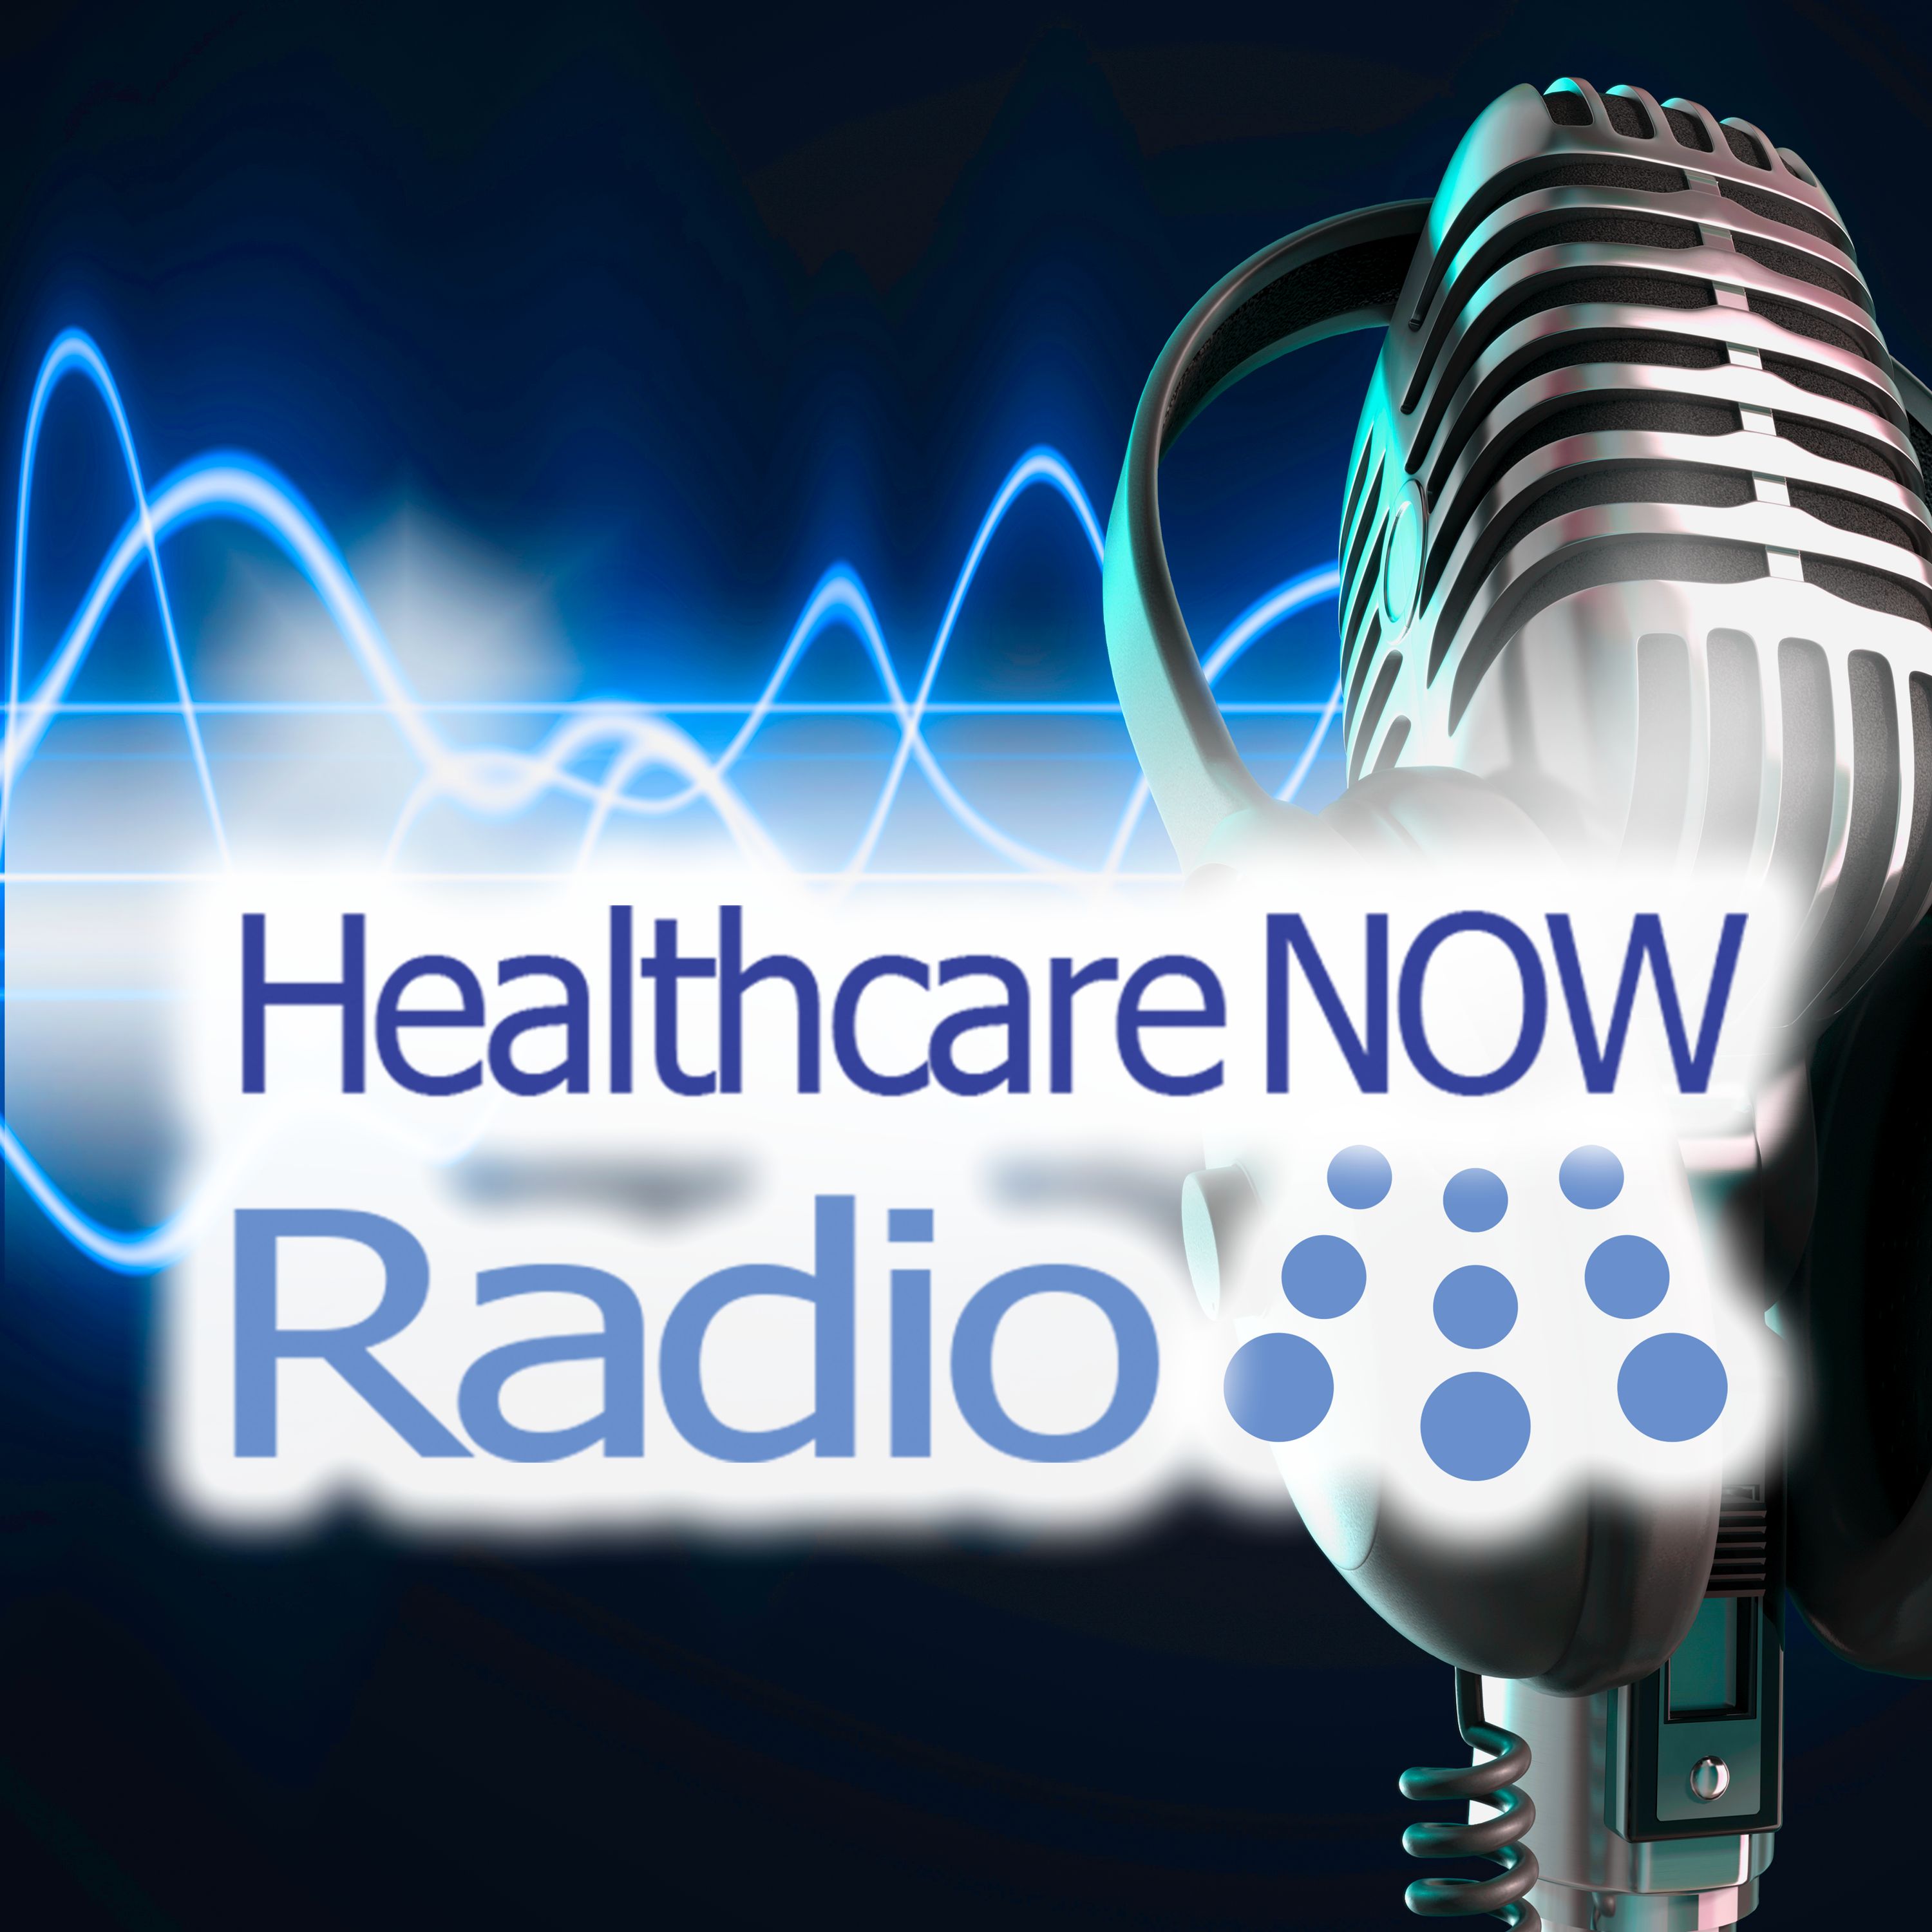 Healthcare NOW Radio Podcast Network - Discussions on healthcare including technology, innovation, p